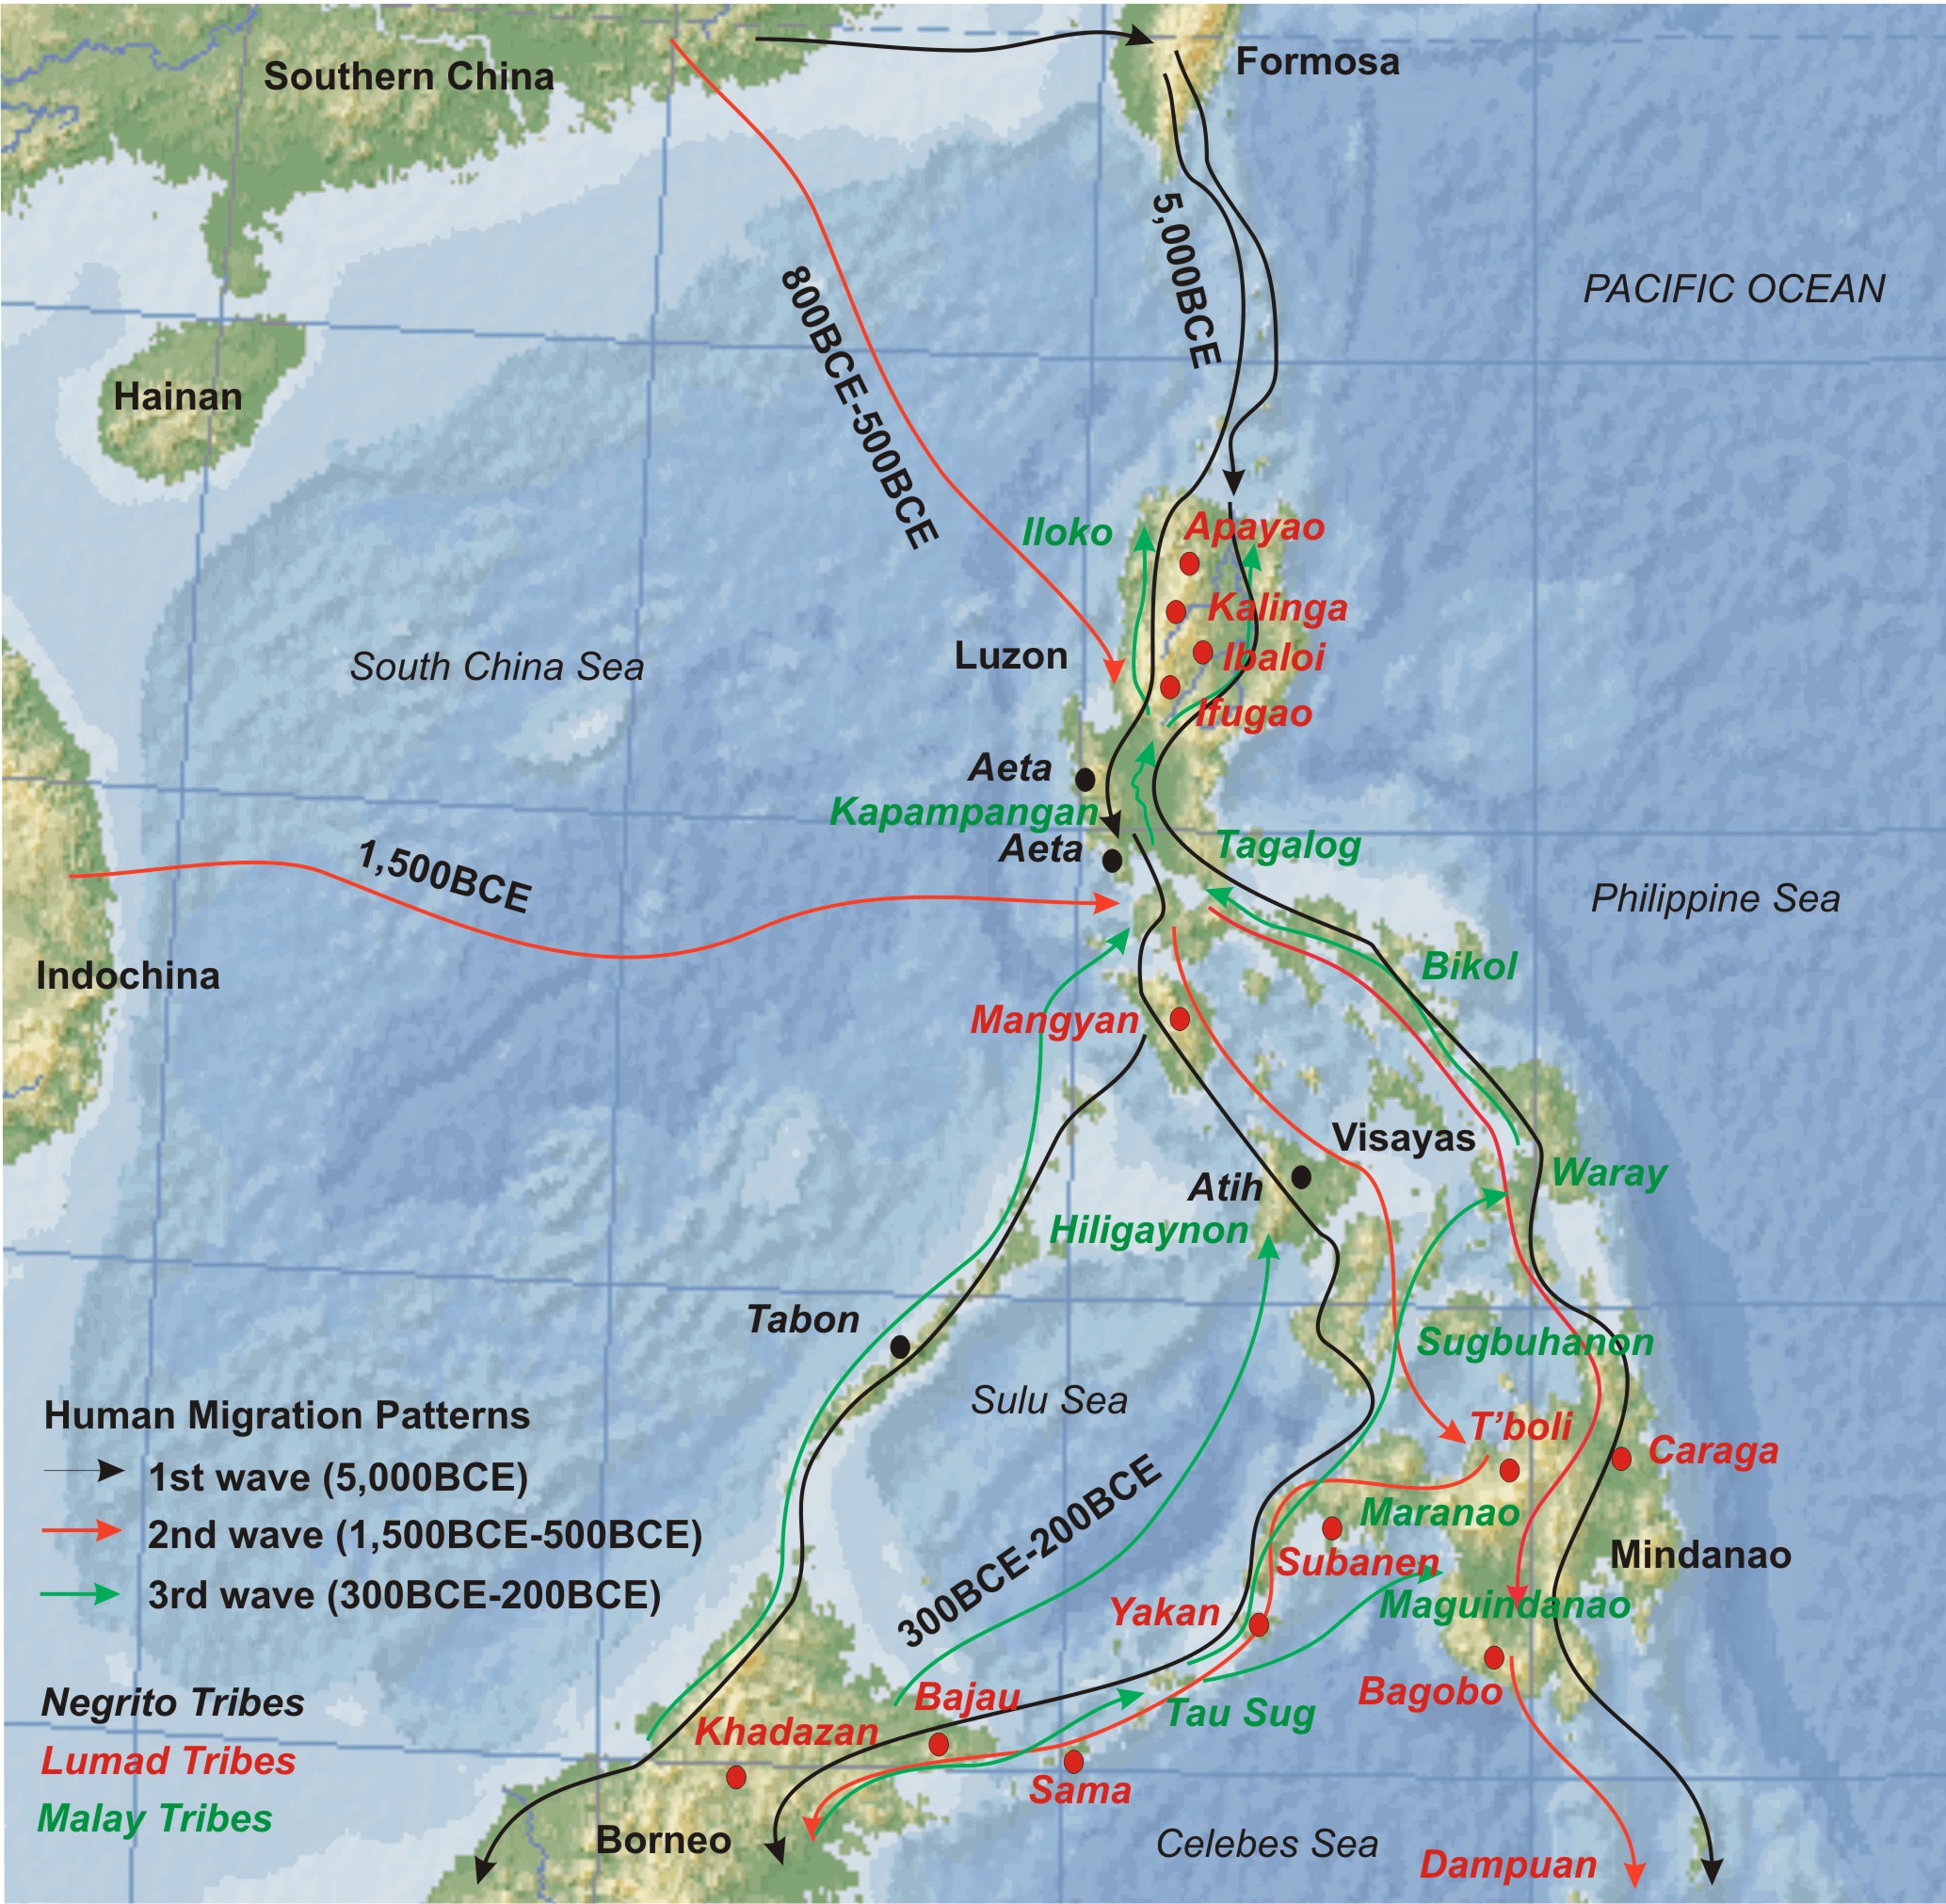 Human migration into the Philippines and Basilan